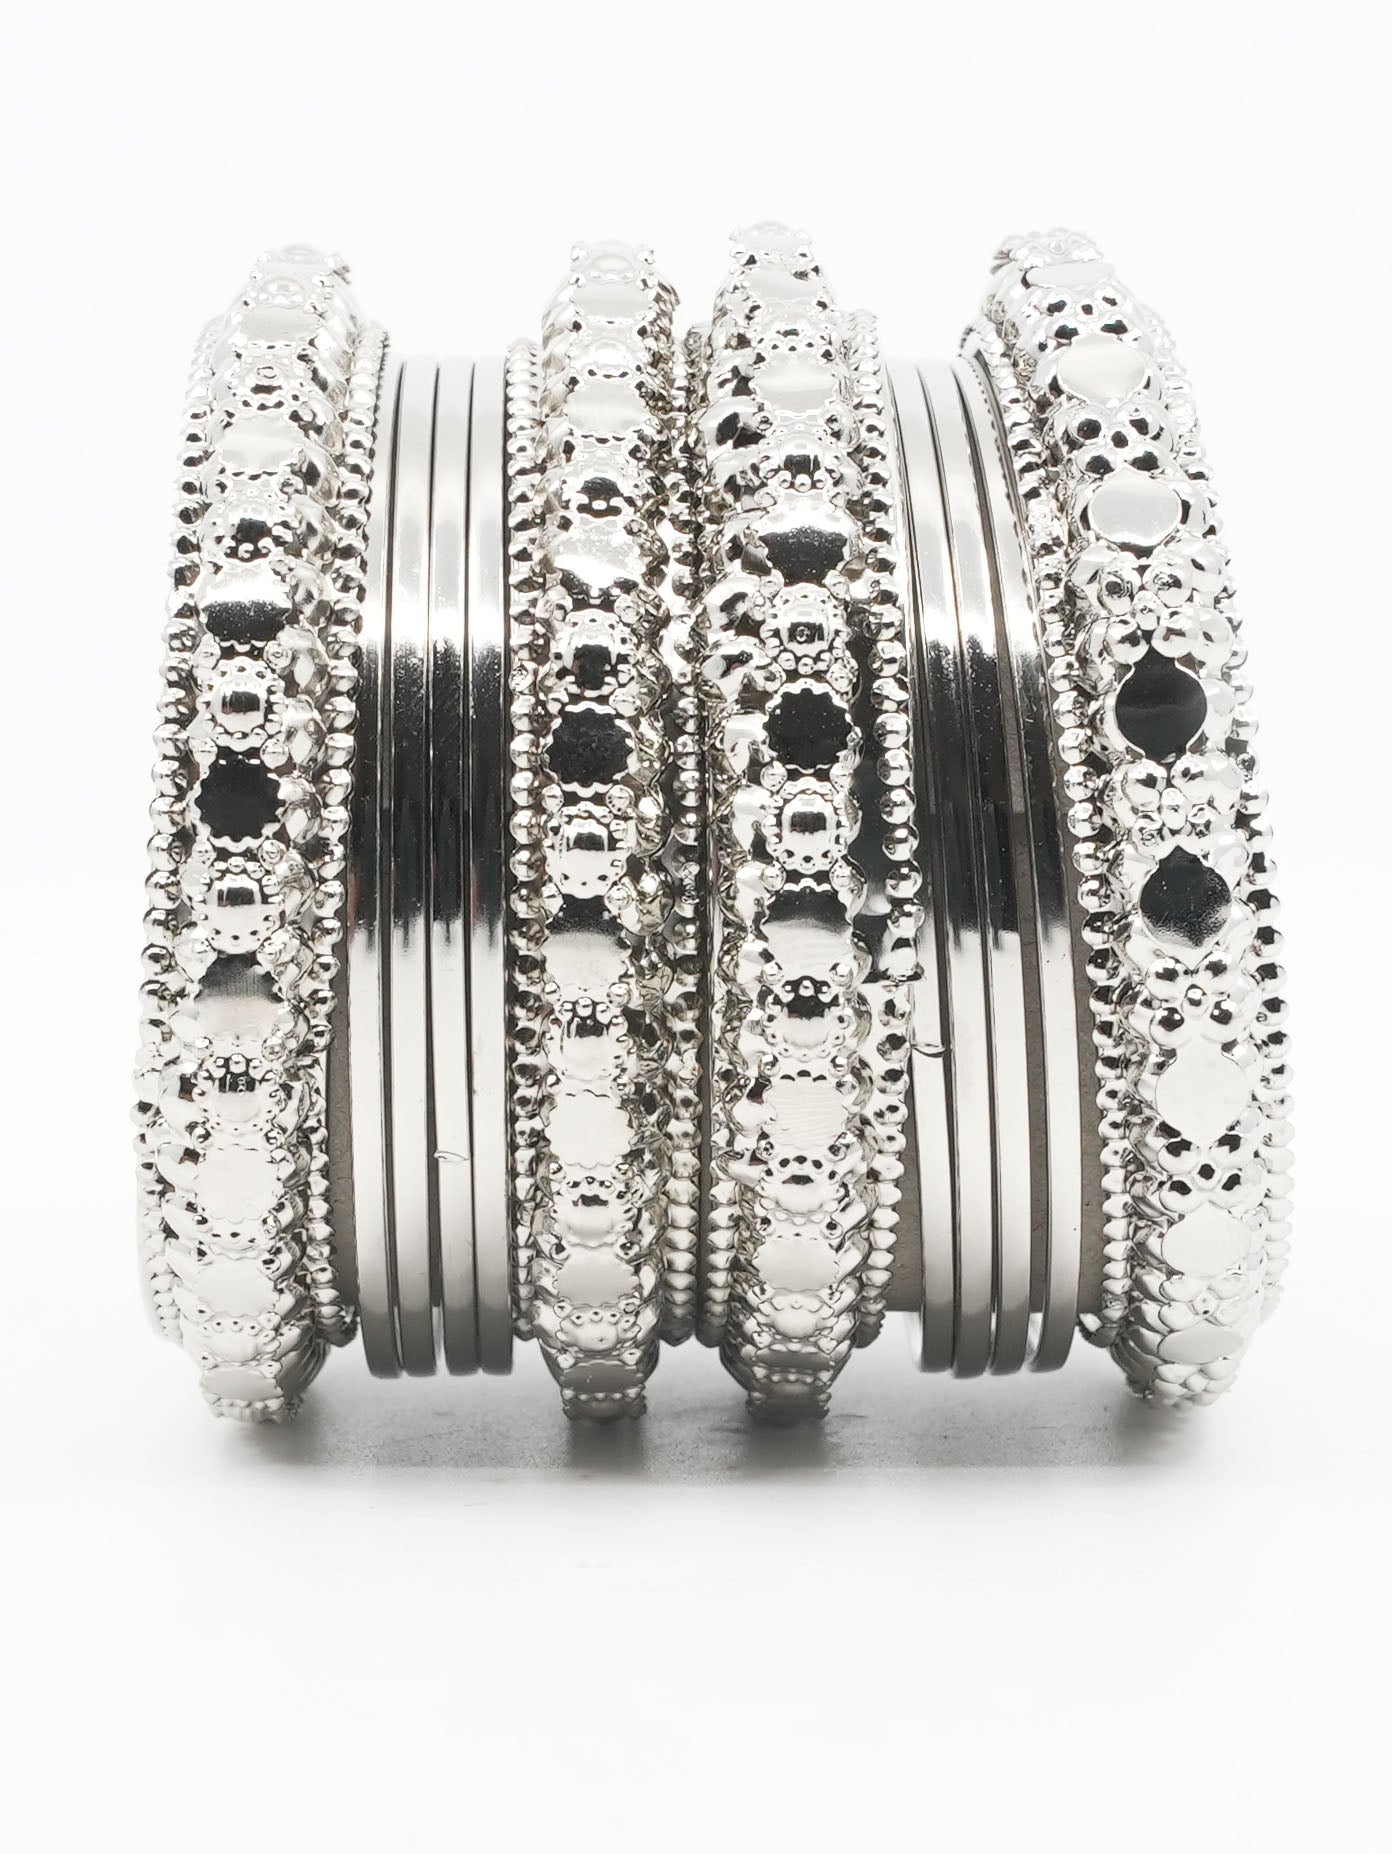 Fancy Silver Plated Bangles Set of 12 bangles 11464K